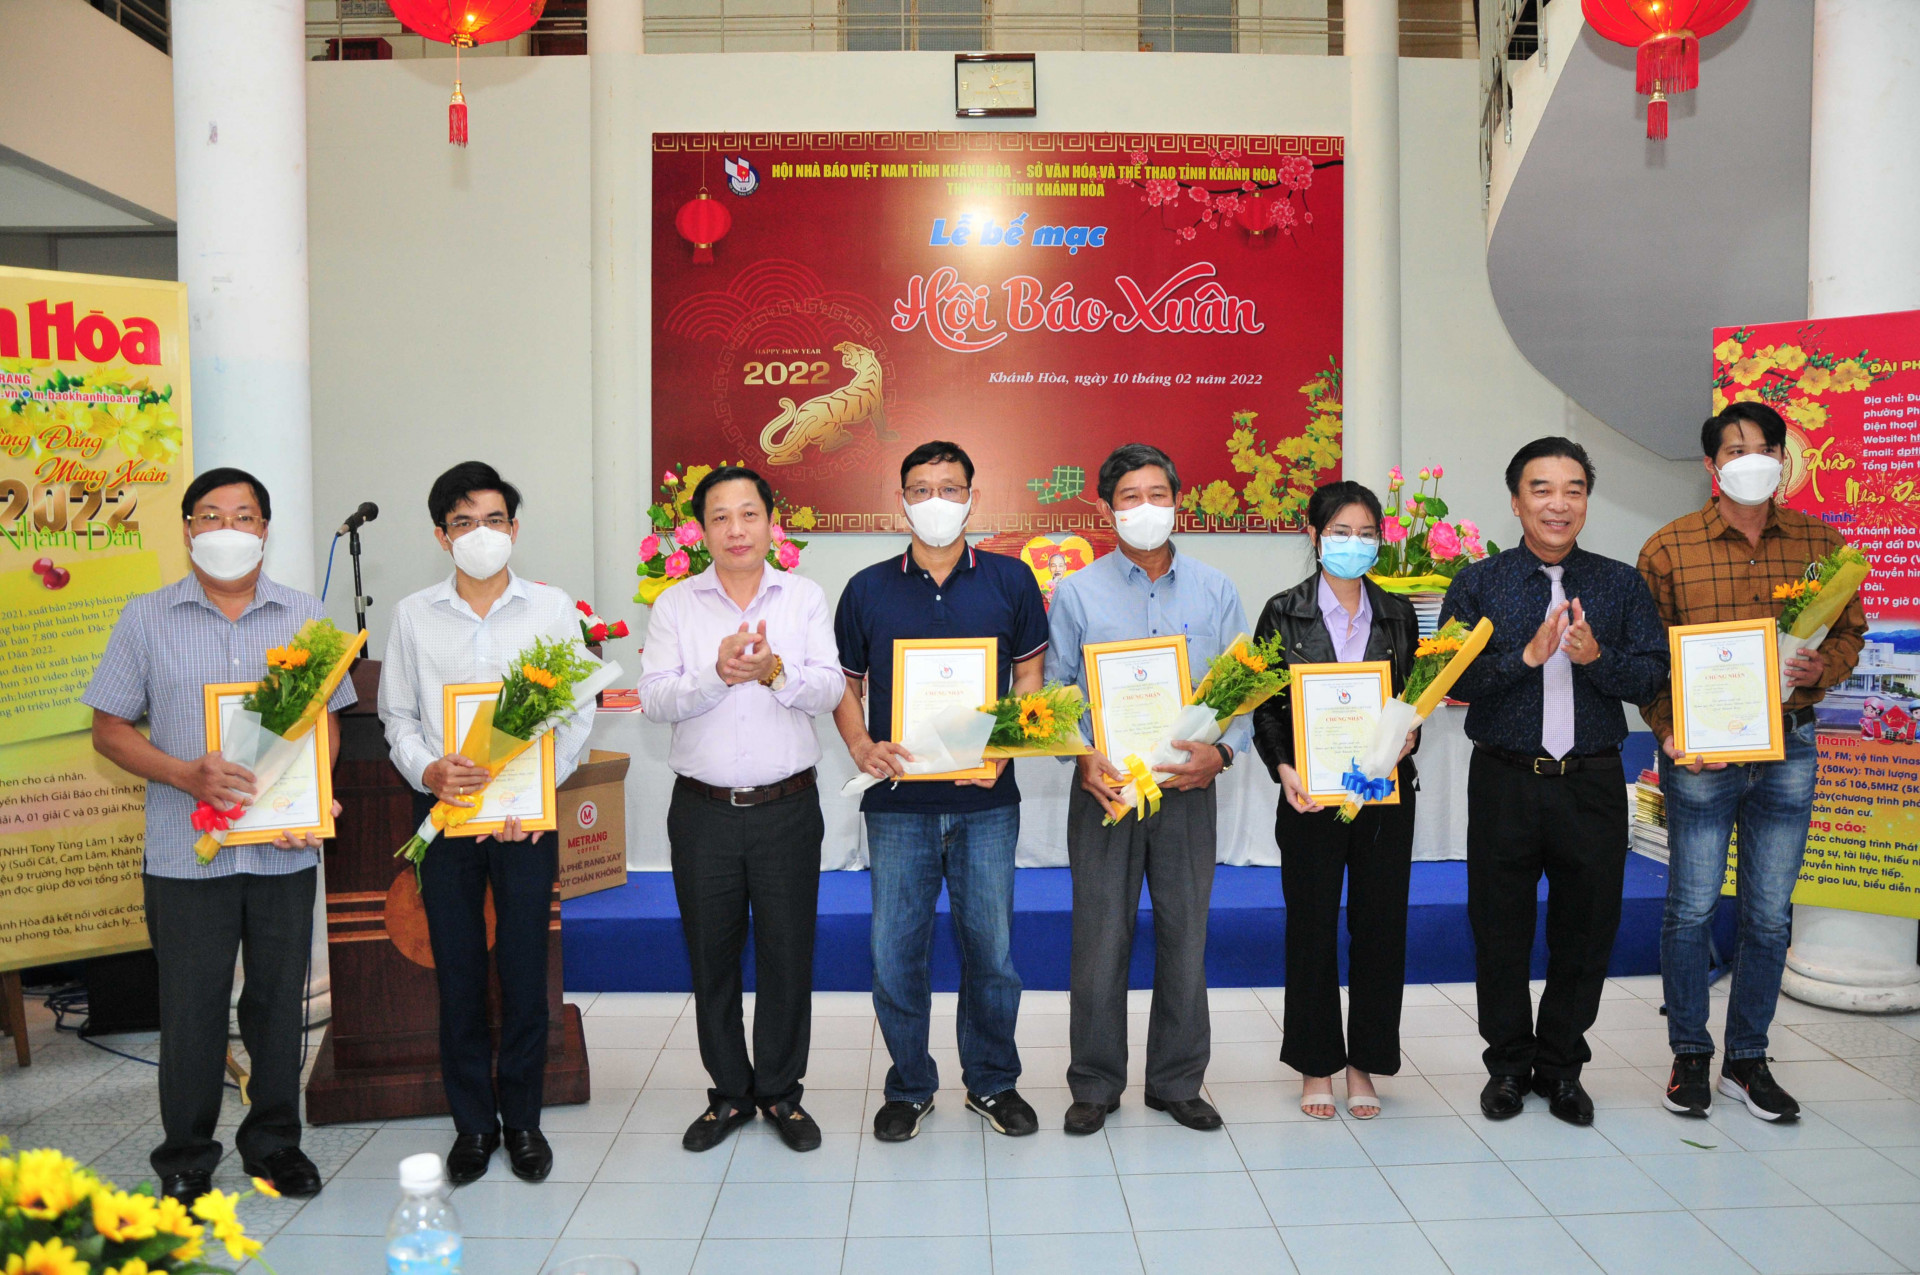 Awarding certificates of merit to journalists with excellent articles about Khanh Hoa